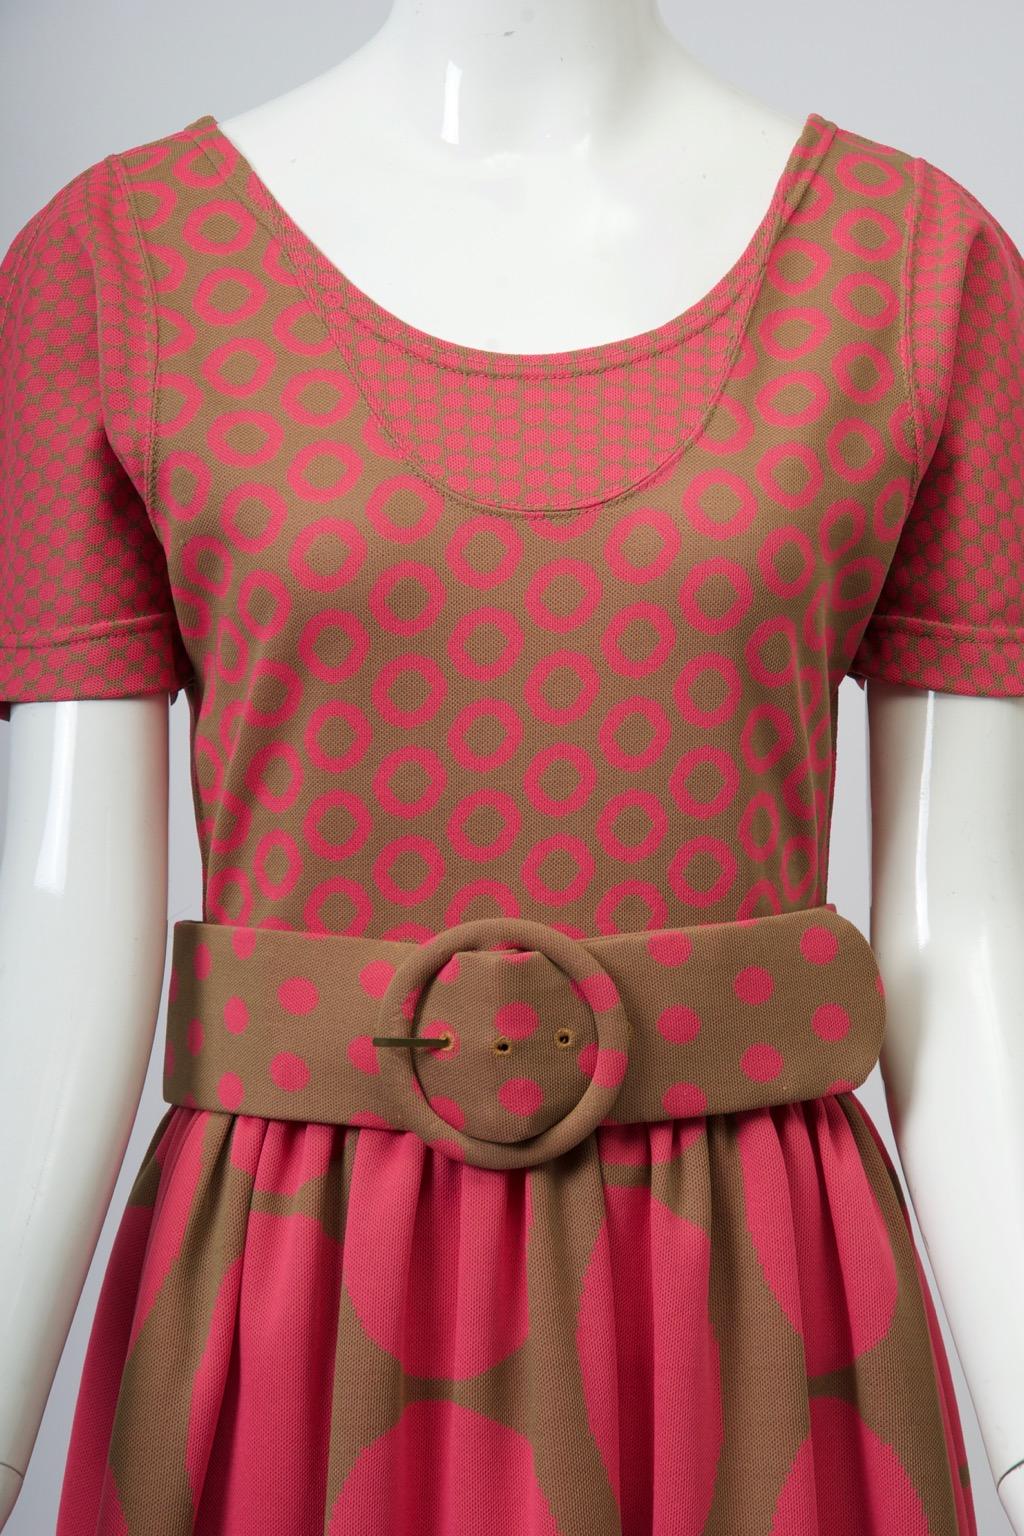 A great find, this Rudi Gernreich c.1970s dress is fashioned of polyester knit featuring a dot design in varying sizes in pink and olive, the bodice simulating a jumper and tee shirt form with scoop neck and short sleeves, each of contrasting small